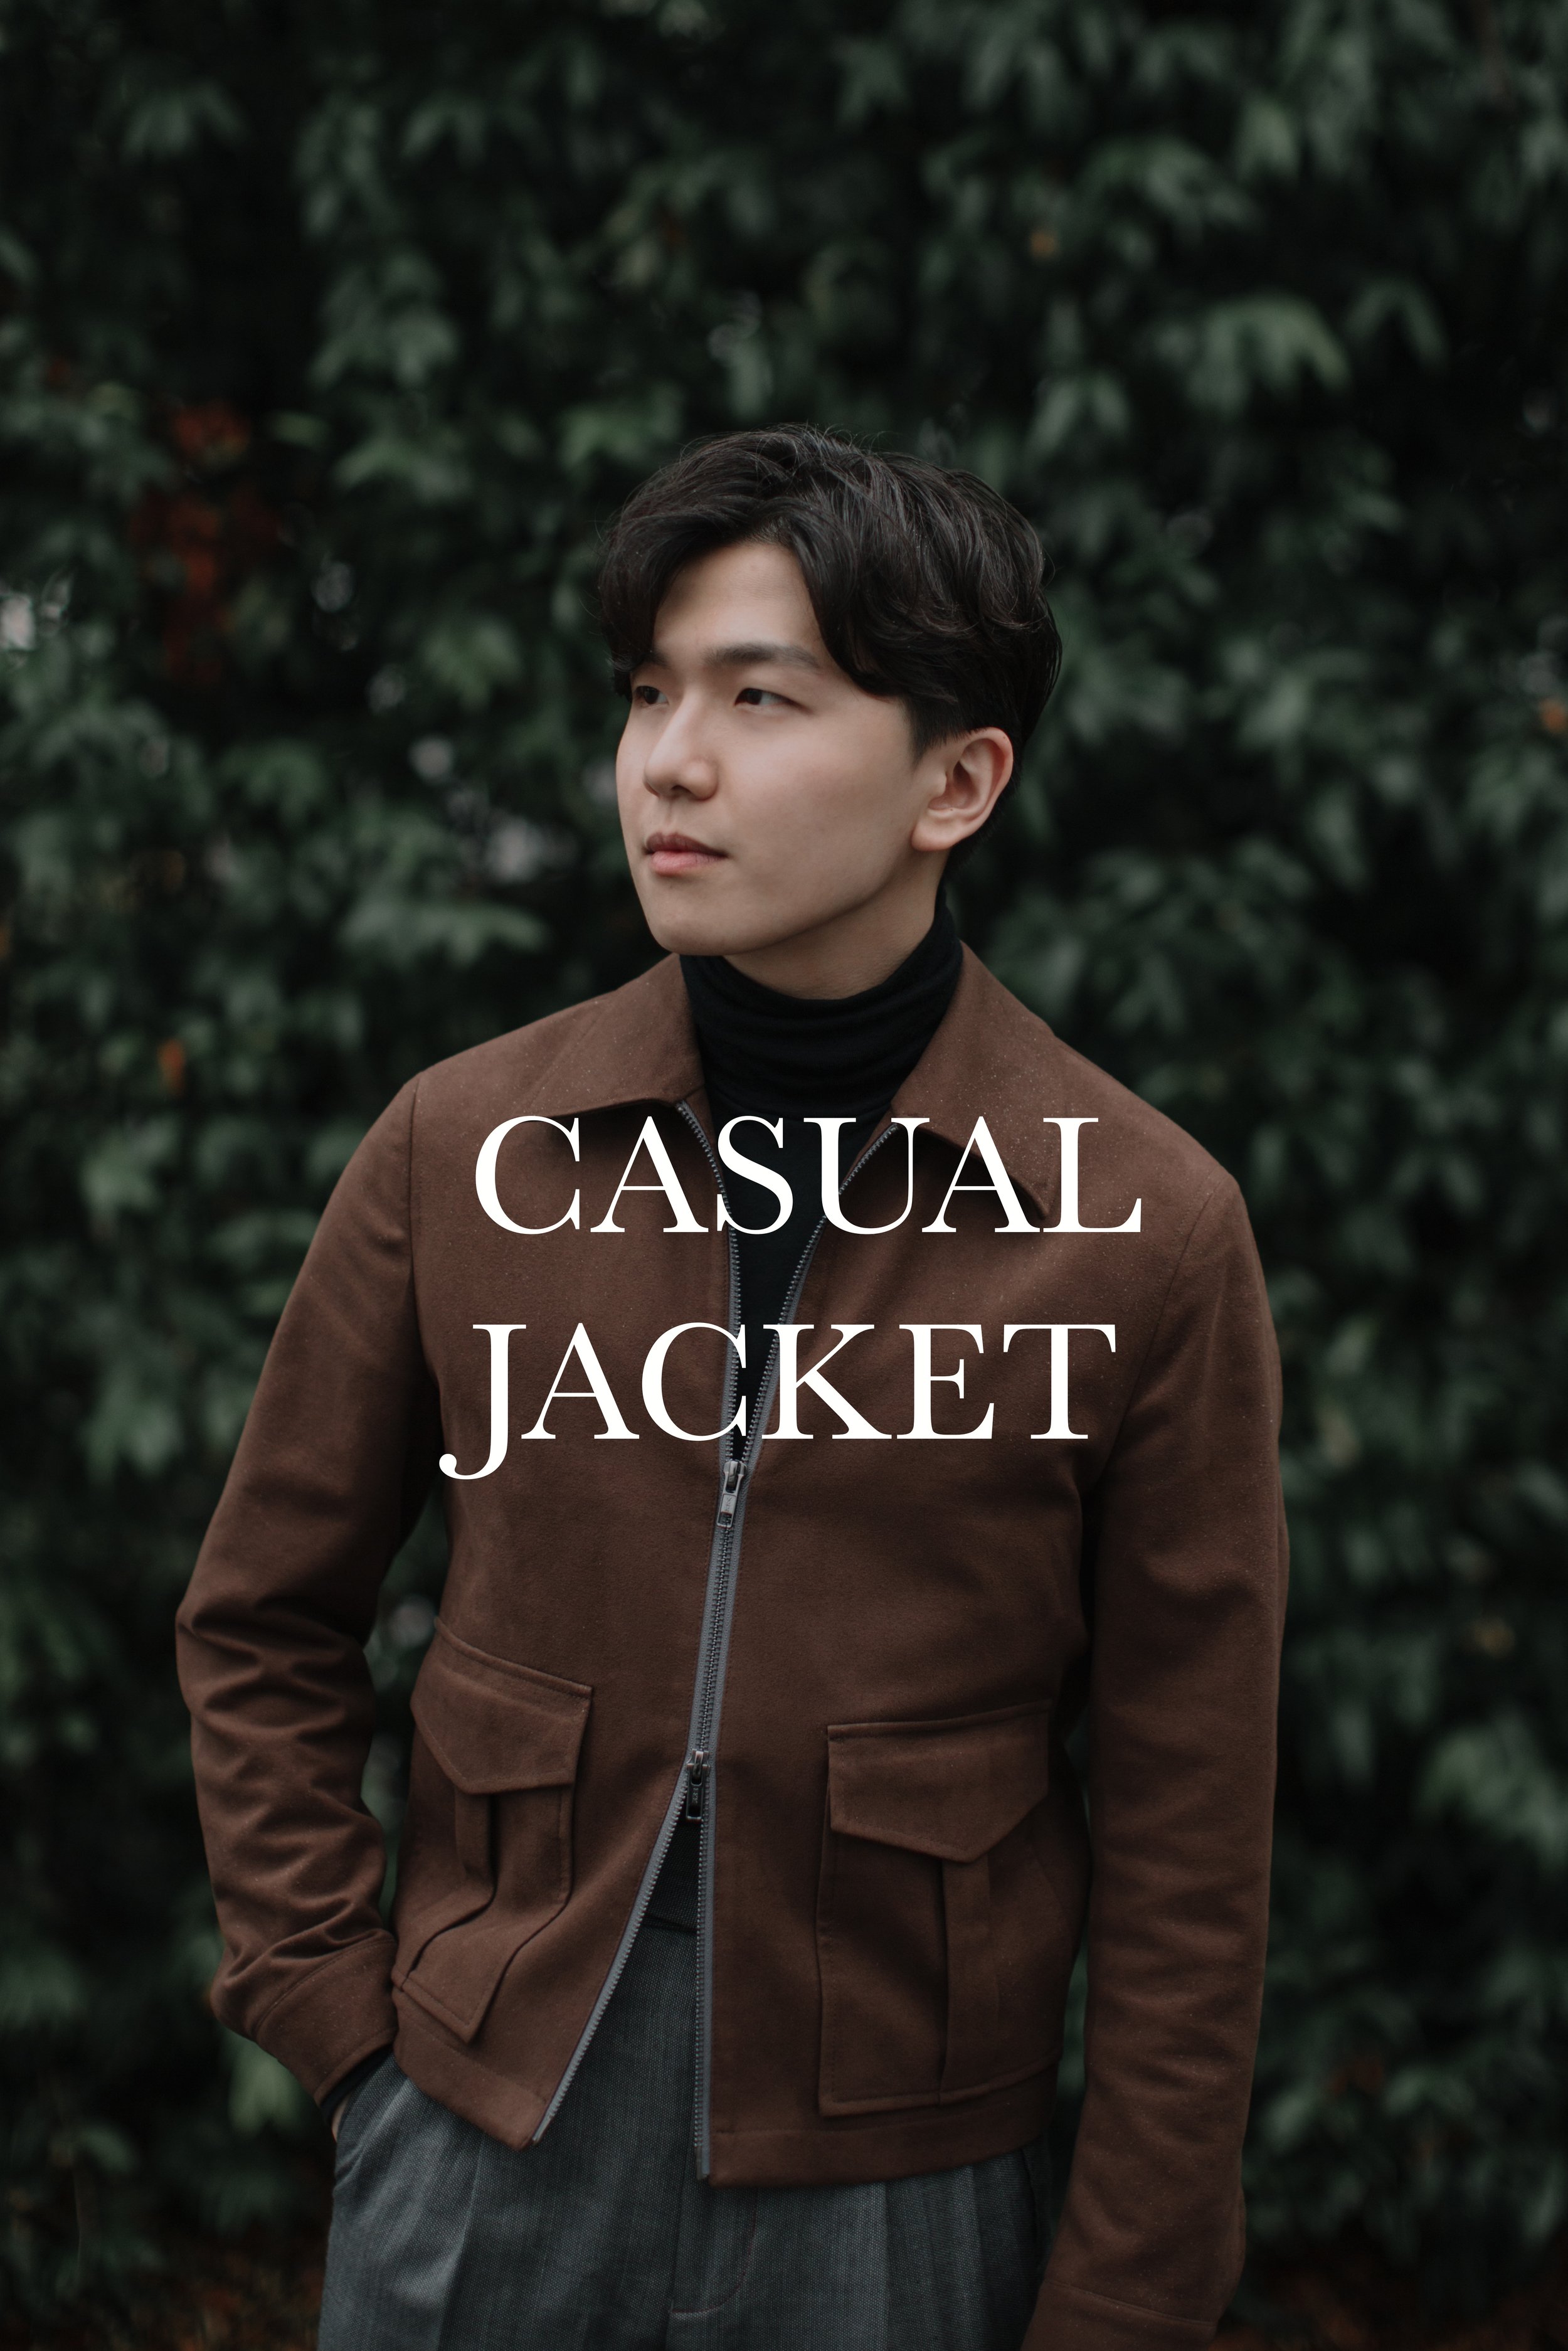 Made Suits Casual Jacket Singapore tailor made suits bespoke tailor singapore suits ESCORIAL Standeven Made Suits Commonsuits sucks.jpg